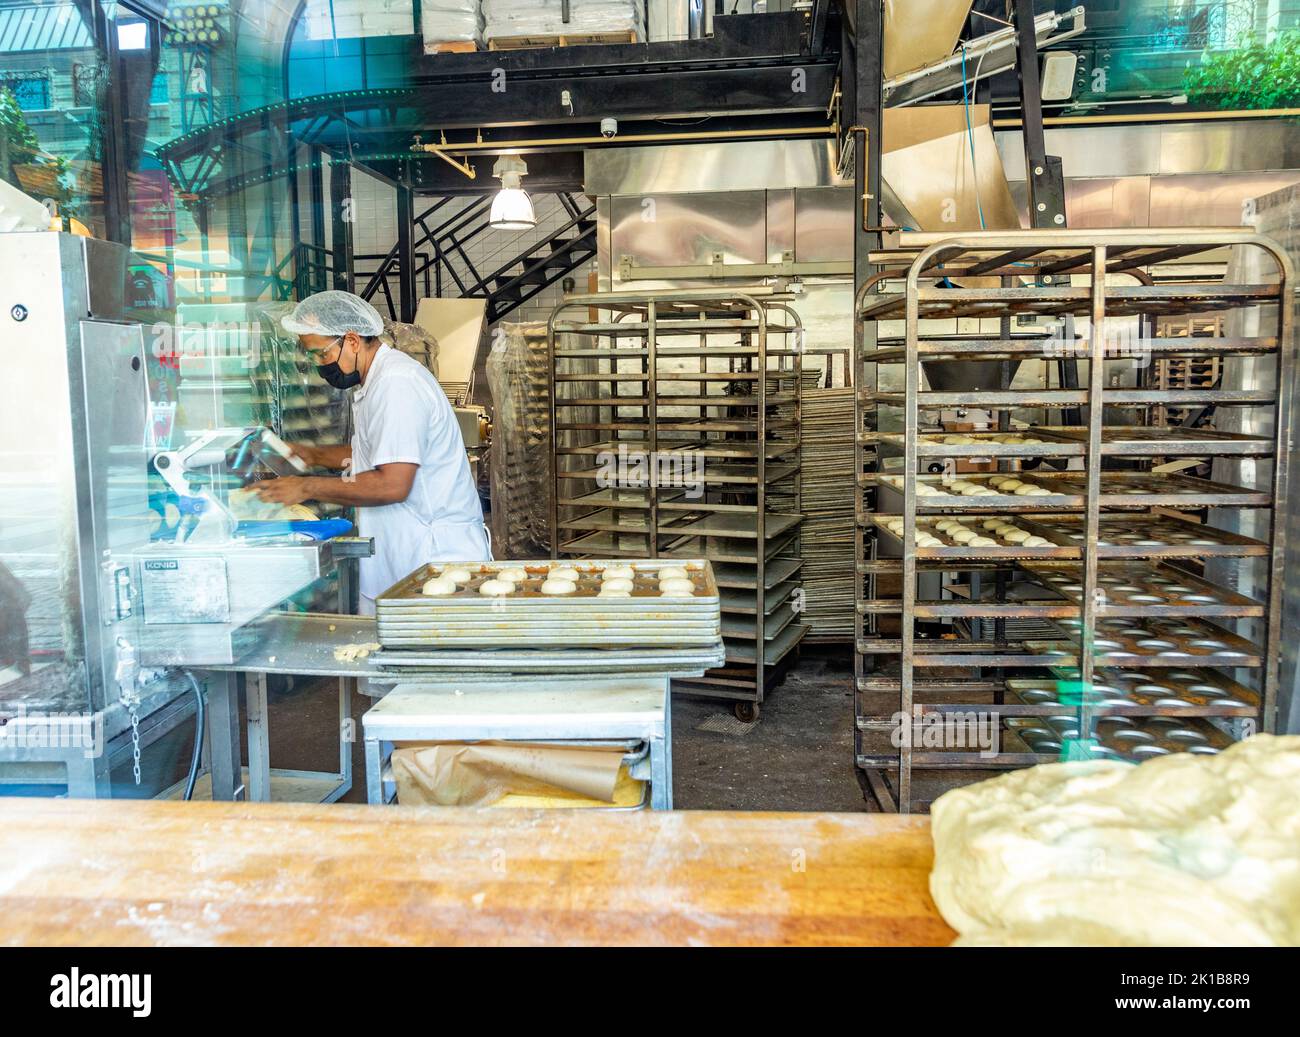 San Francisco, USA - June 7, 2022: baker man in the famous old bakery Boudin since 1849 at fisherman's wharf in San Francisco. Stock Photo